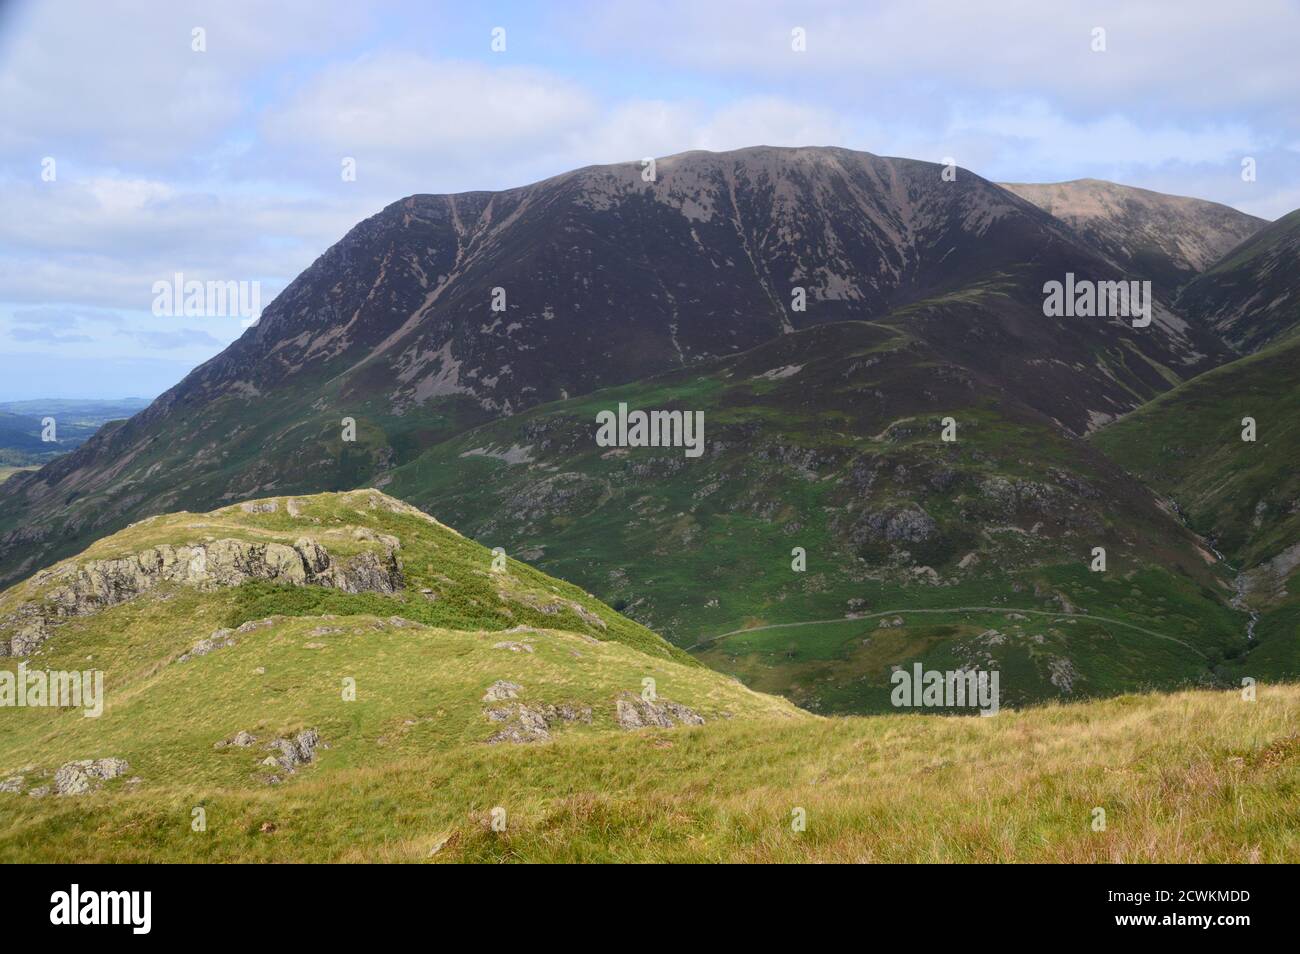 The Wainwright Grasmoor from the Top of Rannerdale Knotts, dans le parc national Lake District, Cumbria, Angleterre, Royaume-Uni. Banque D'Images